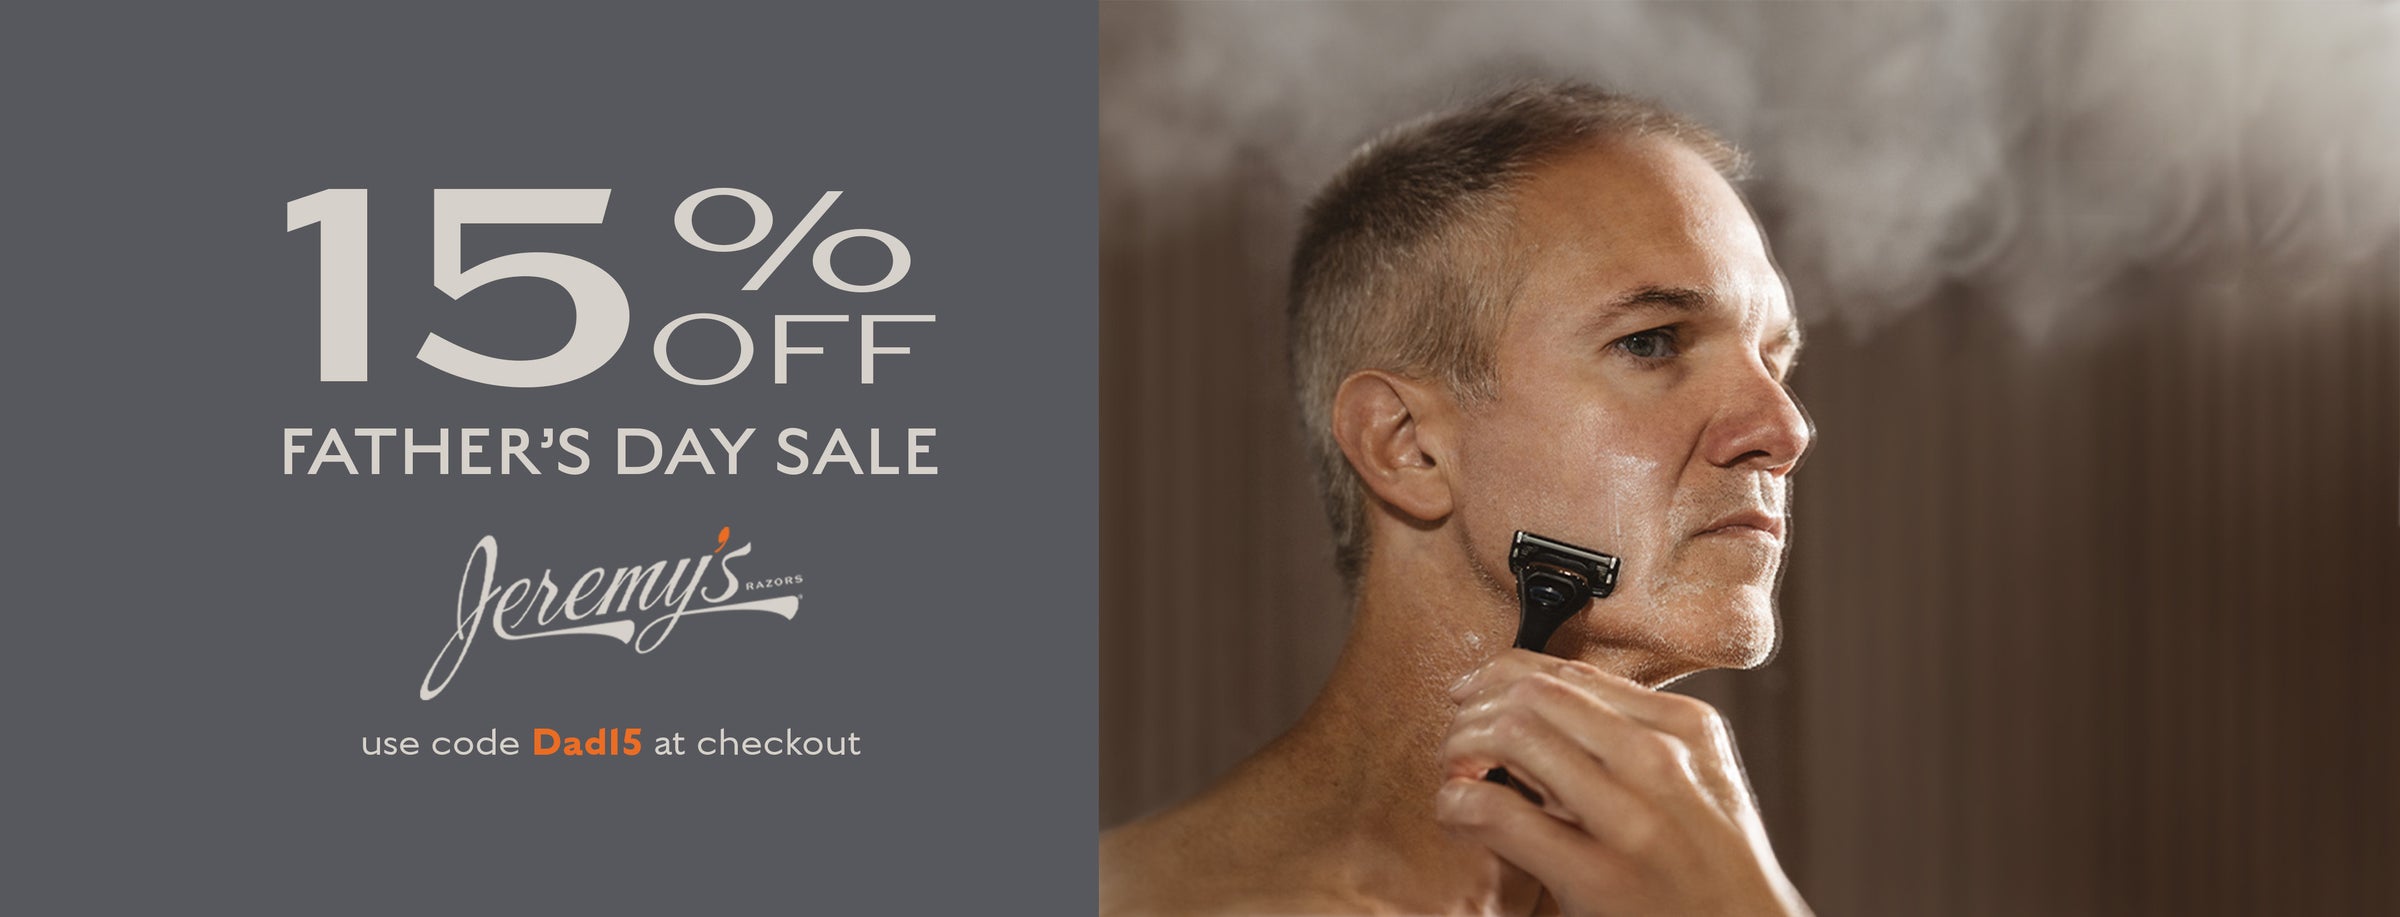 Jeremy's Razors 15% Off Father's Day Sale. Use code Dad15 at checkout.